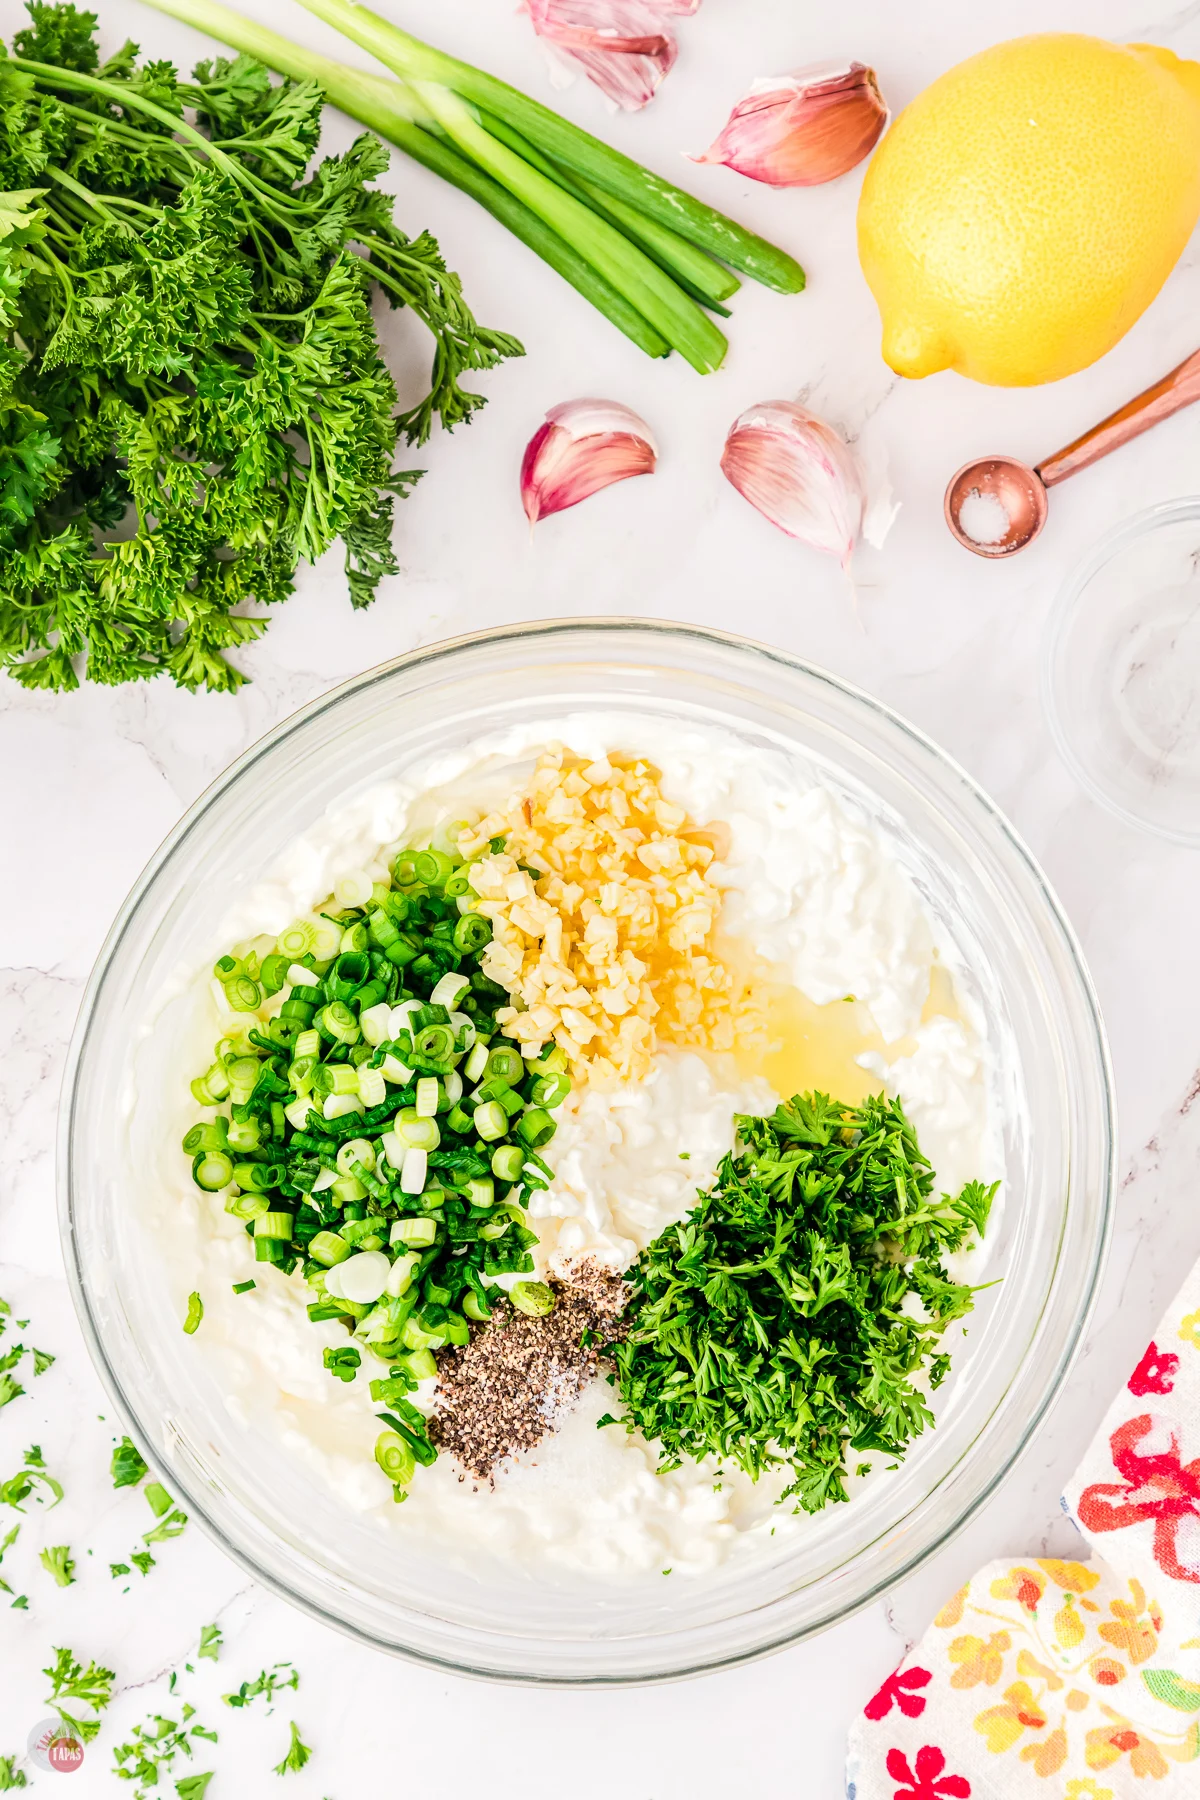 Top view of a large glass bowl on a worktop filled with unmixed green onion dip ingredients, surrounded by lemon, green onion, and fresh parsley. 